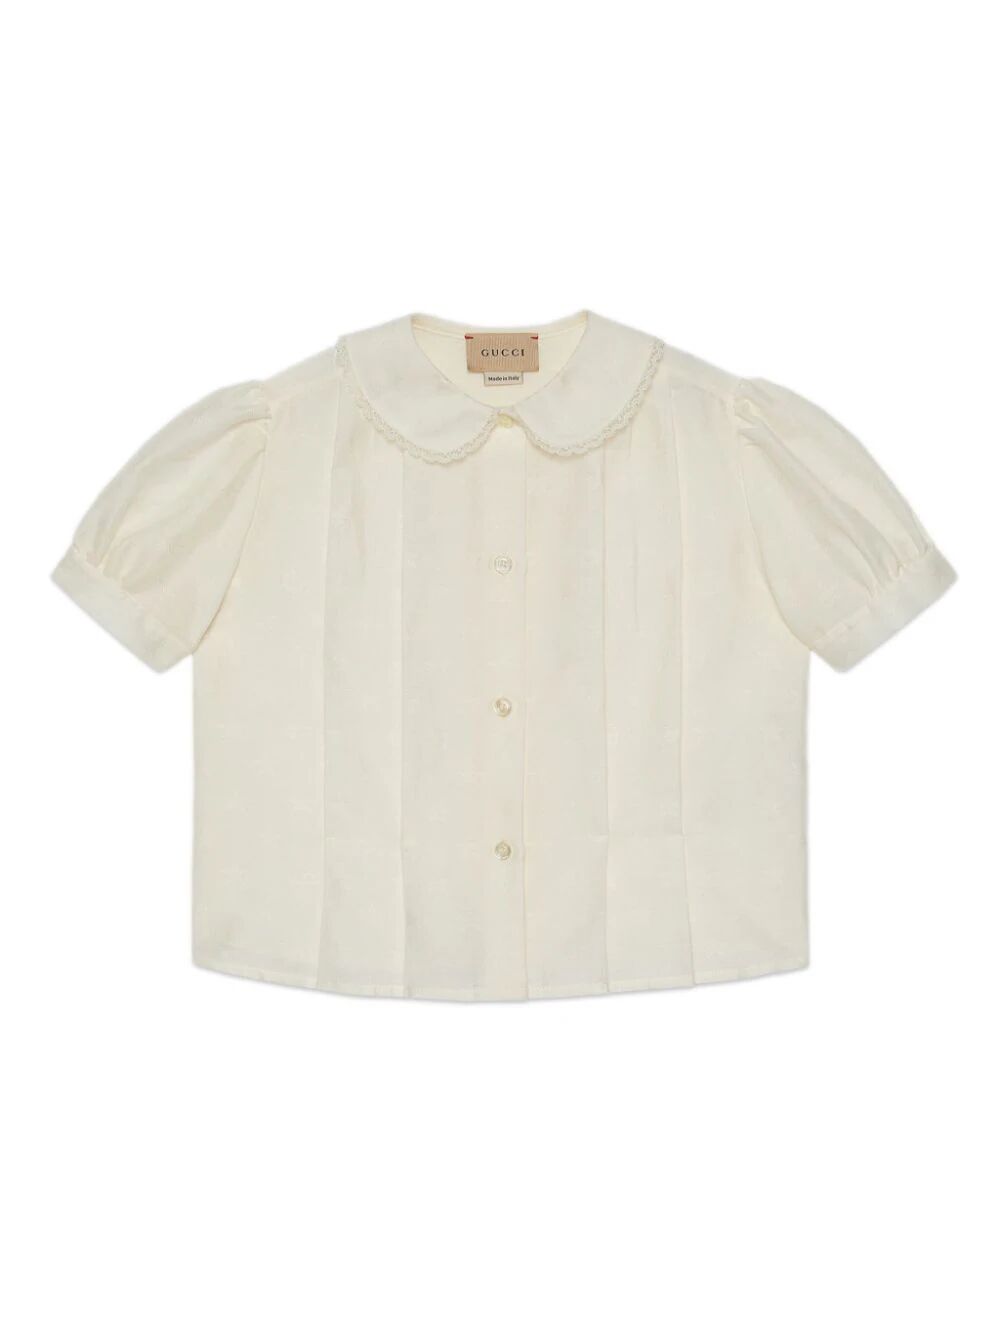 Gucci Kids' Shirt Multistar Cotton Jaquard In White